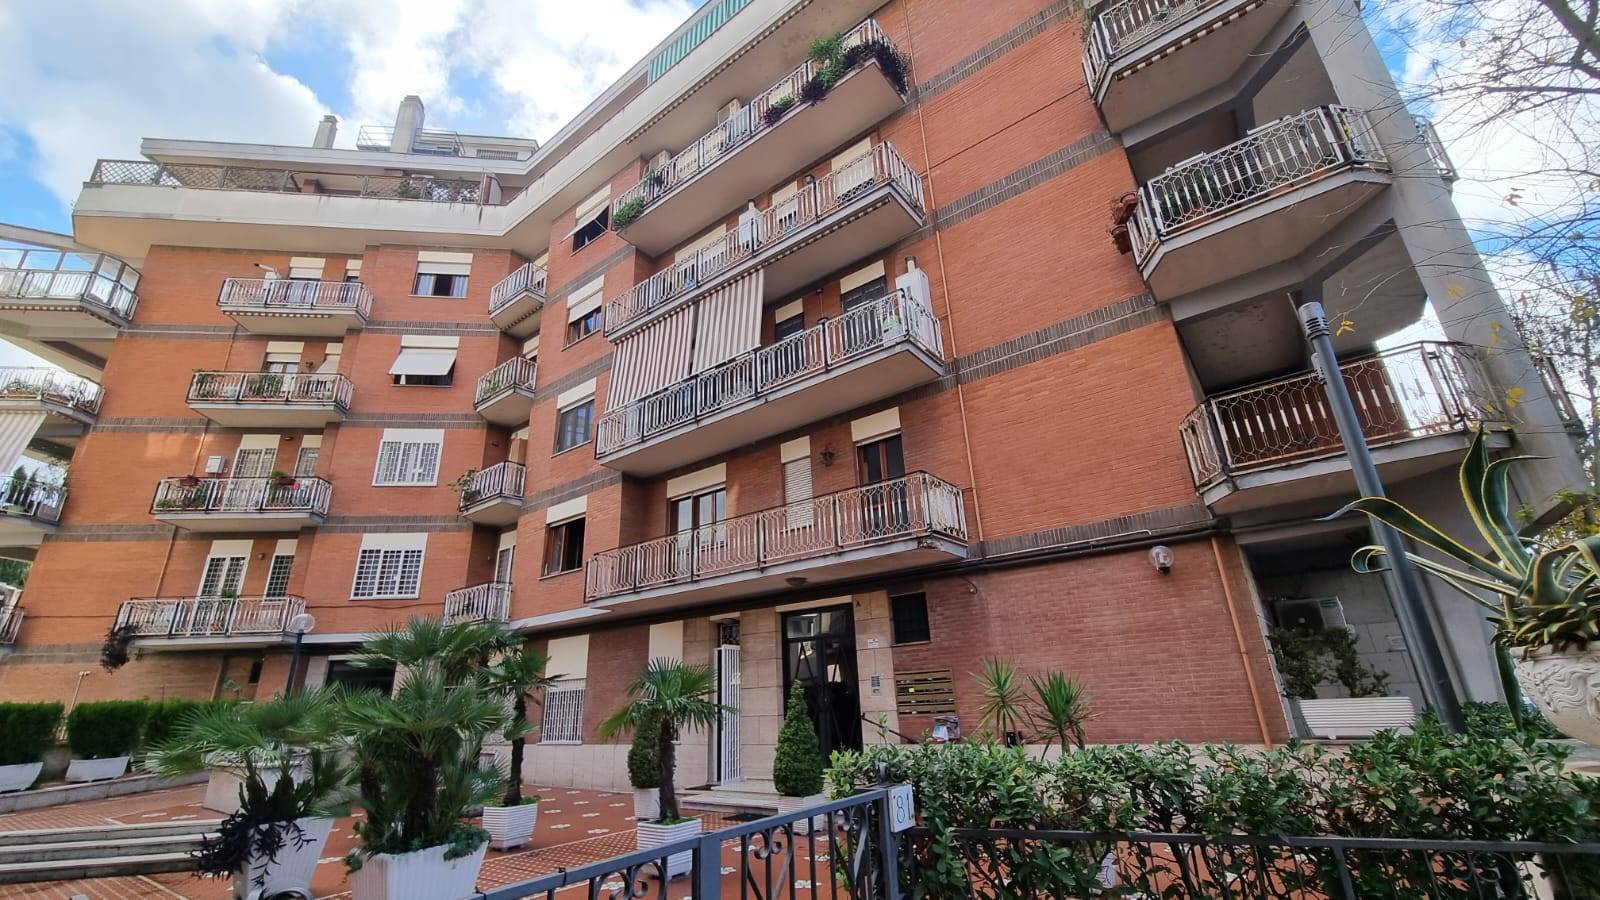 TALENTI, ROMA, Apartment for sale of 110 Sq. mt., Habitable, Heating Centralized, Energetic class: G, Epi: 175 kwh/m2 year, placed at 3° on 5, 